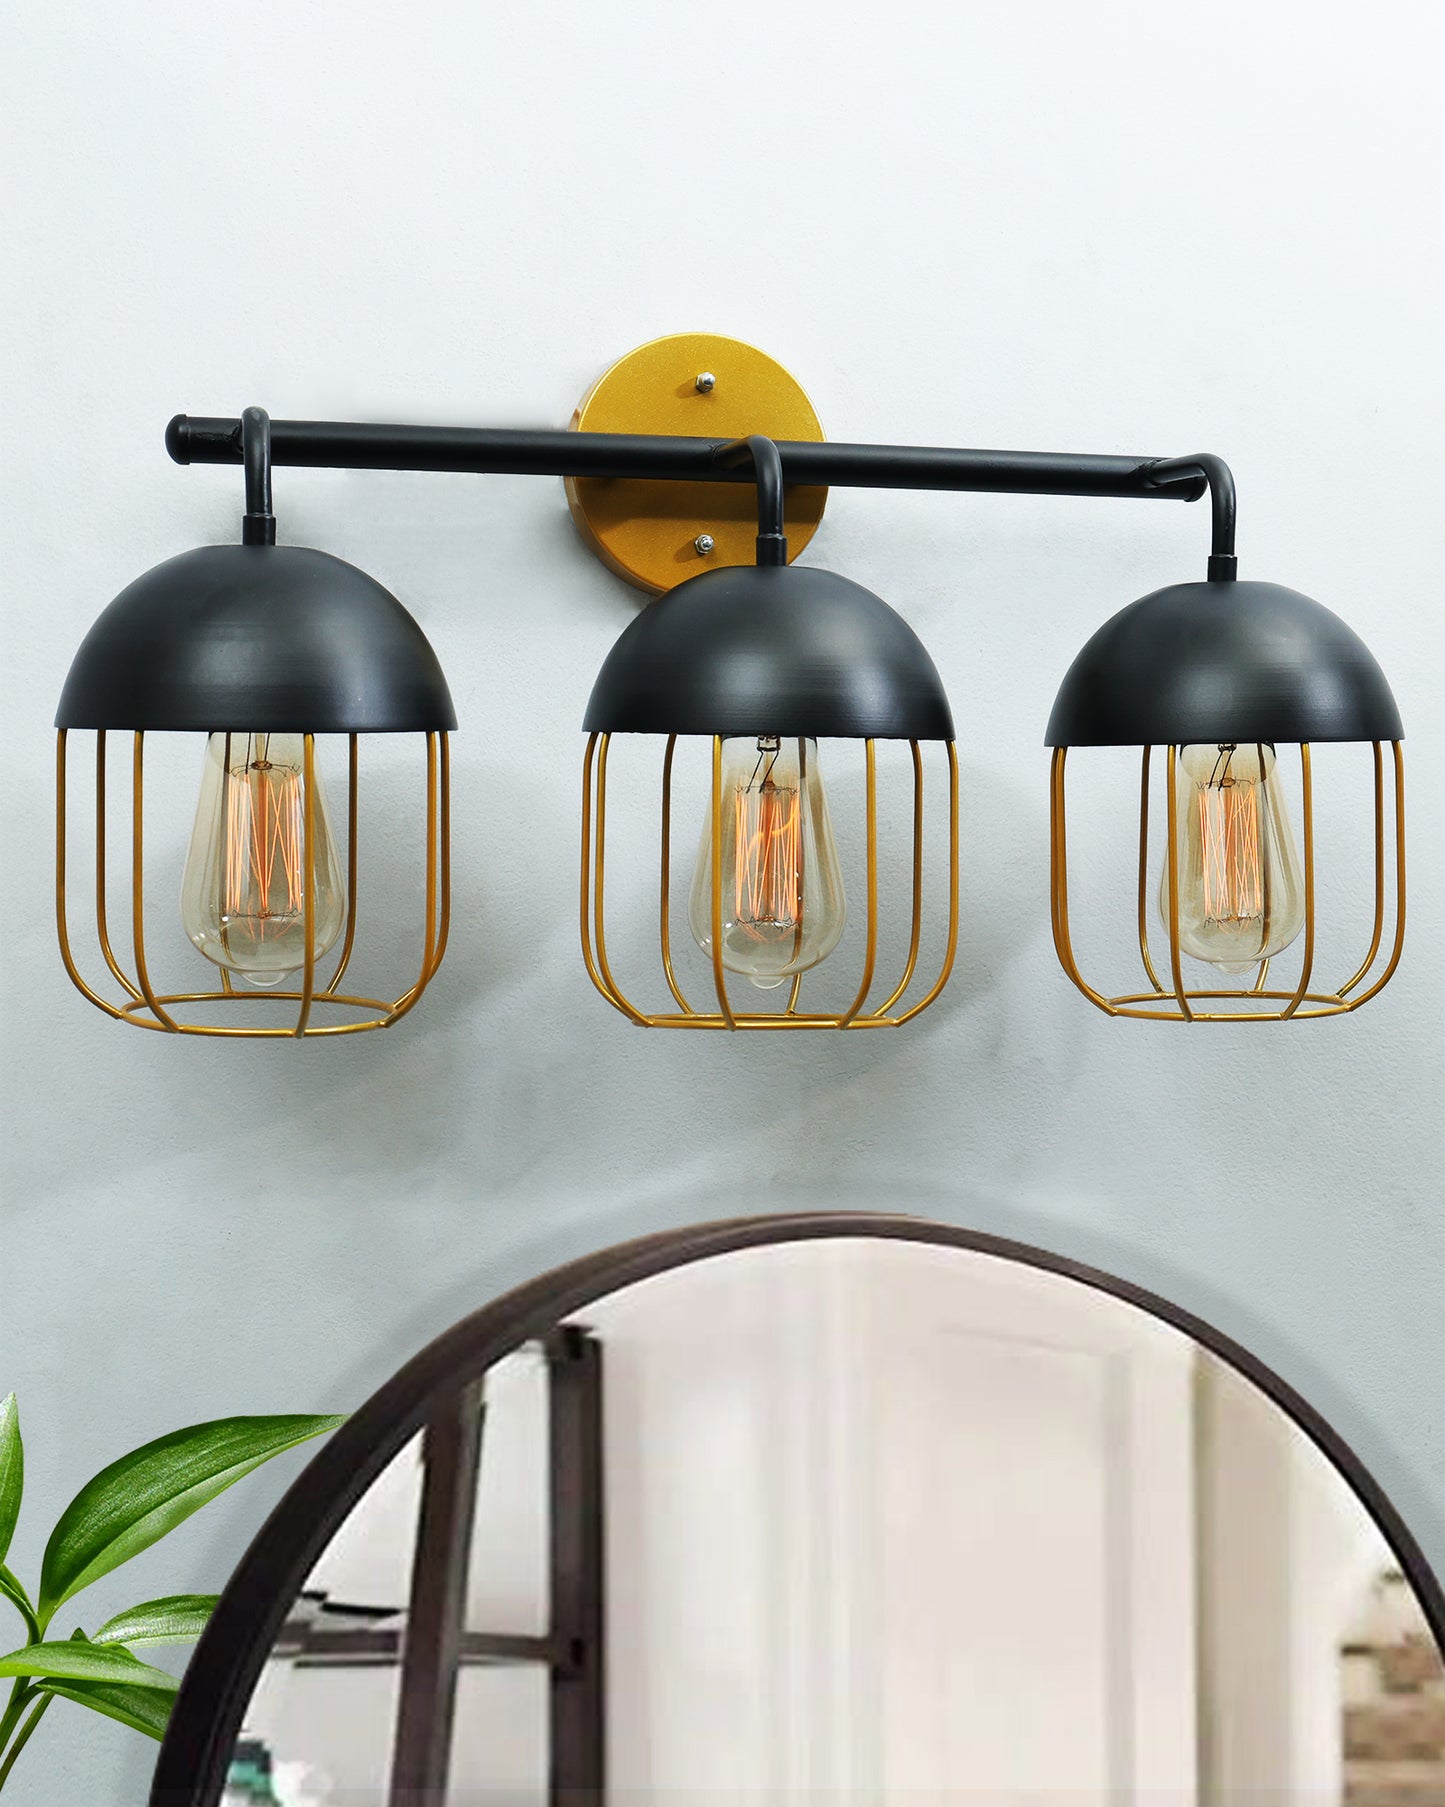 Cage Wall Sconce,Modern Bathroom Wall Light Fixtures 3 Light Bathroom Vanity Light, Fixture for Bathroom Lights Over Mirror, Farmhouse Black and Gold